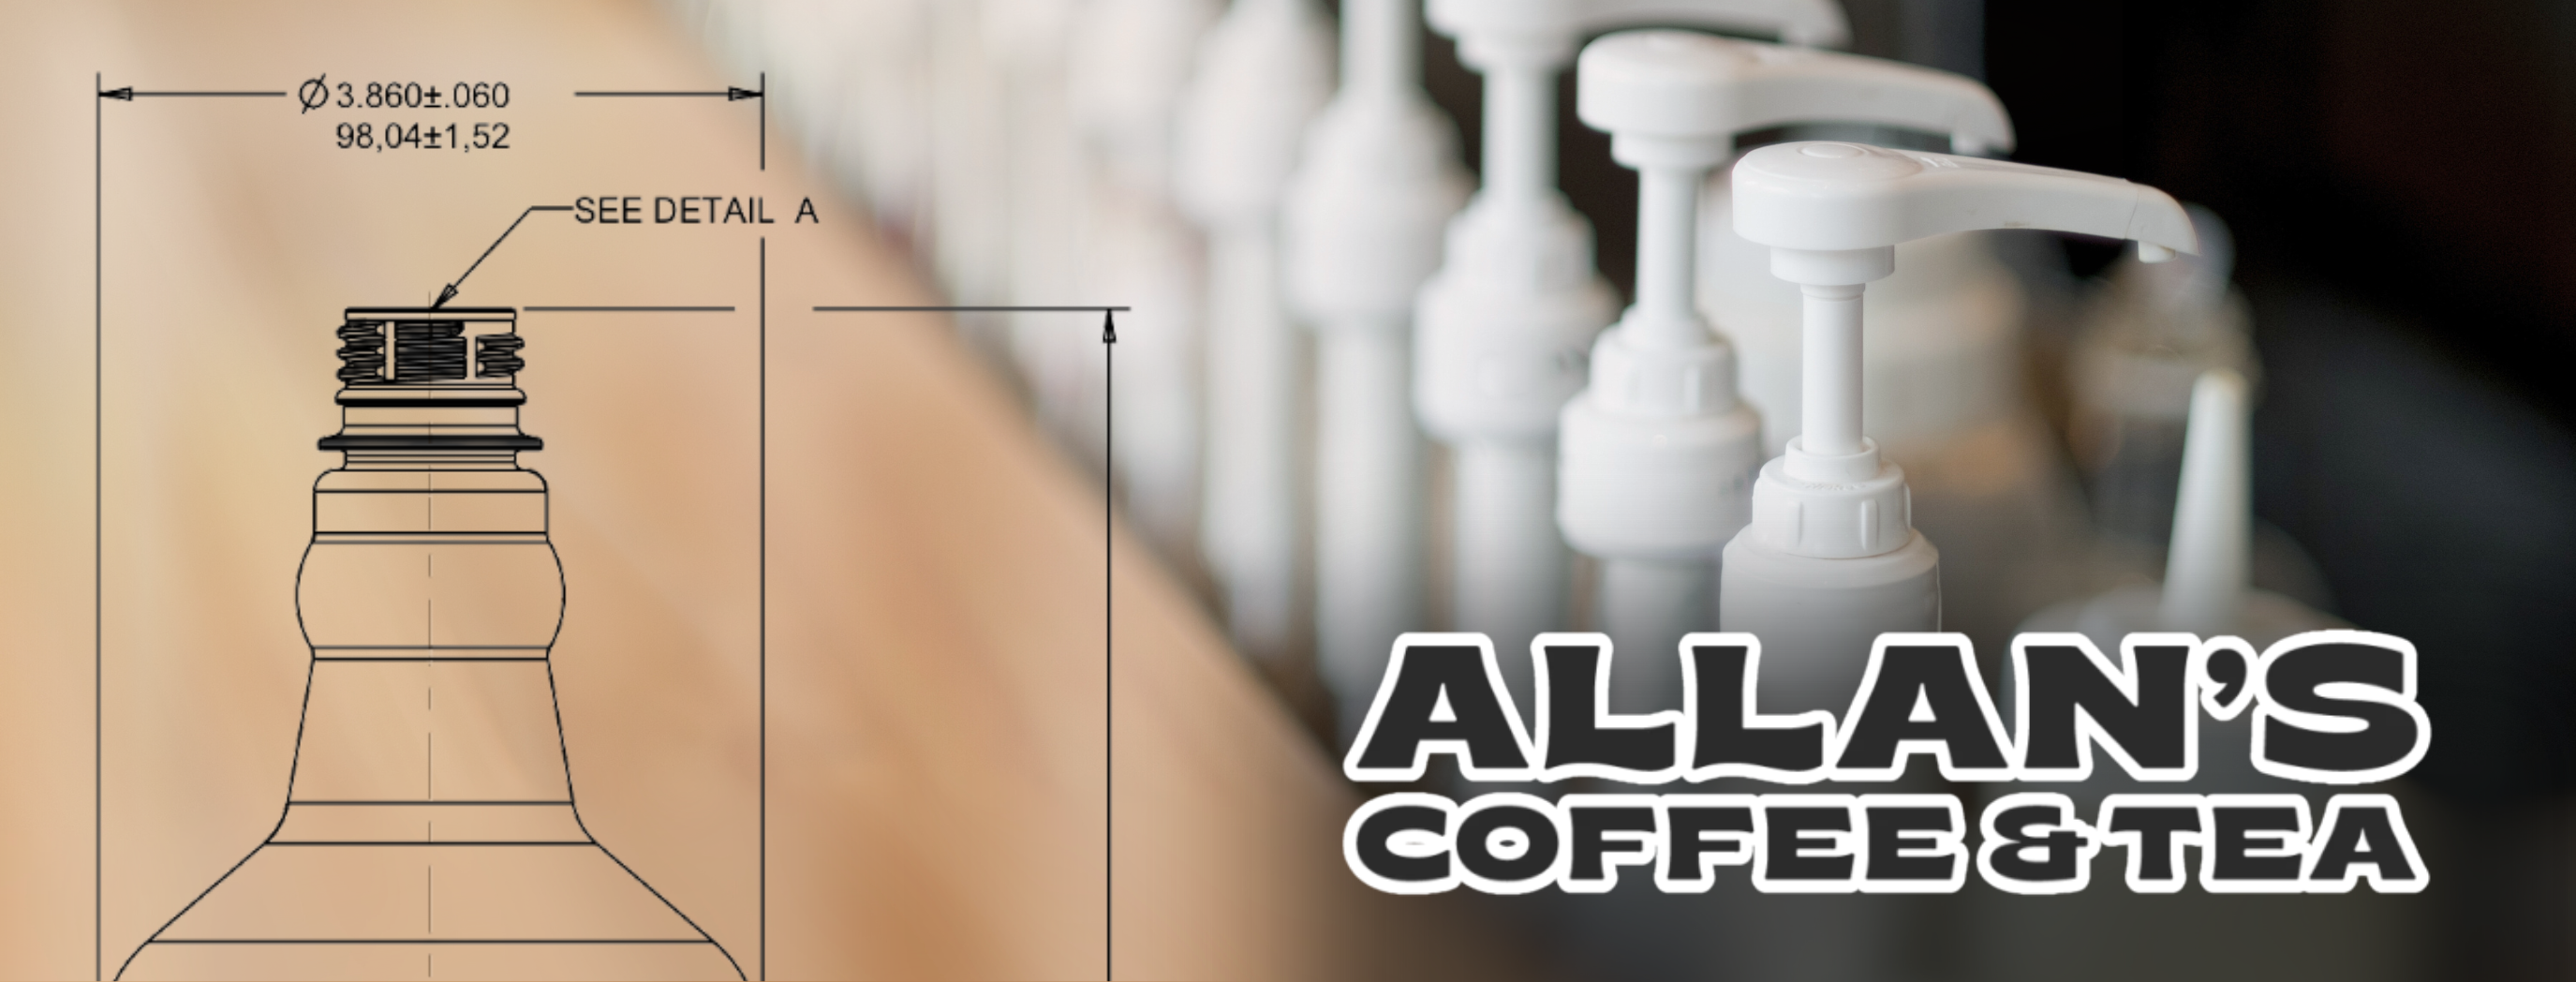 Containers and Coffee: A Custom Packaging Solution for Allan’s Coffee Flavored Syrups